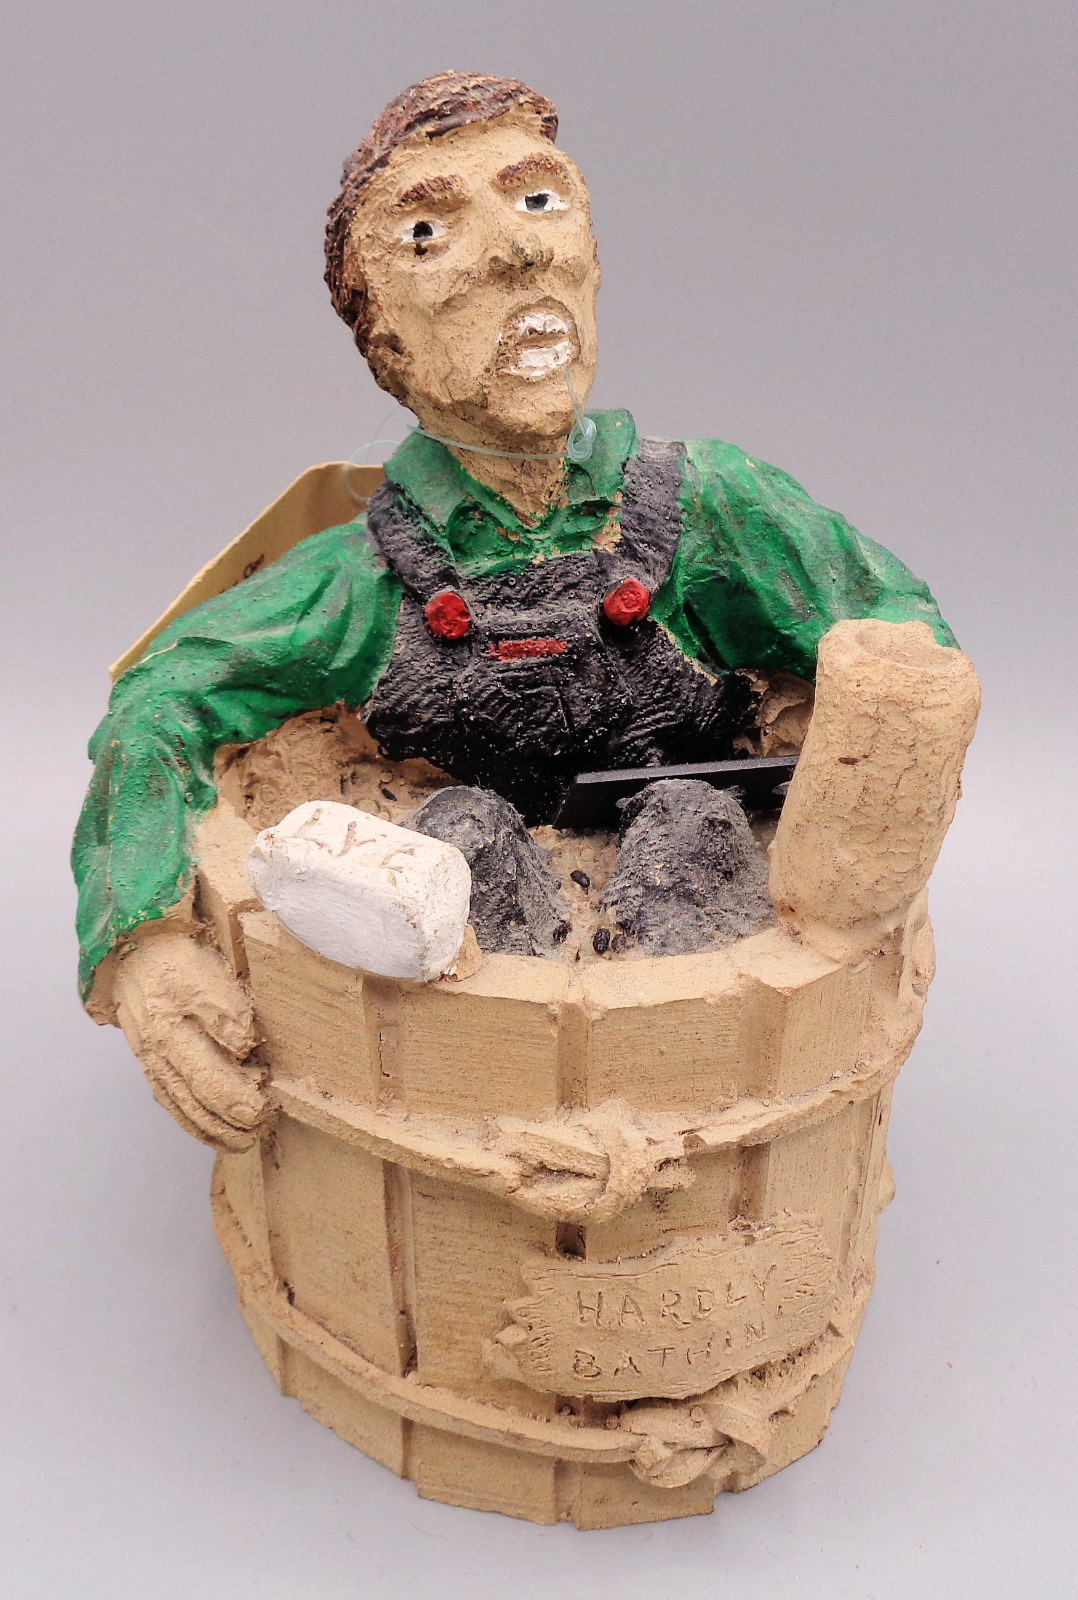 Vintage Hand Made Painted Man in Barrel Country Figurine Primitive Sculpture